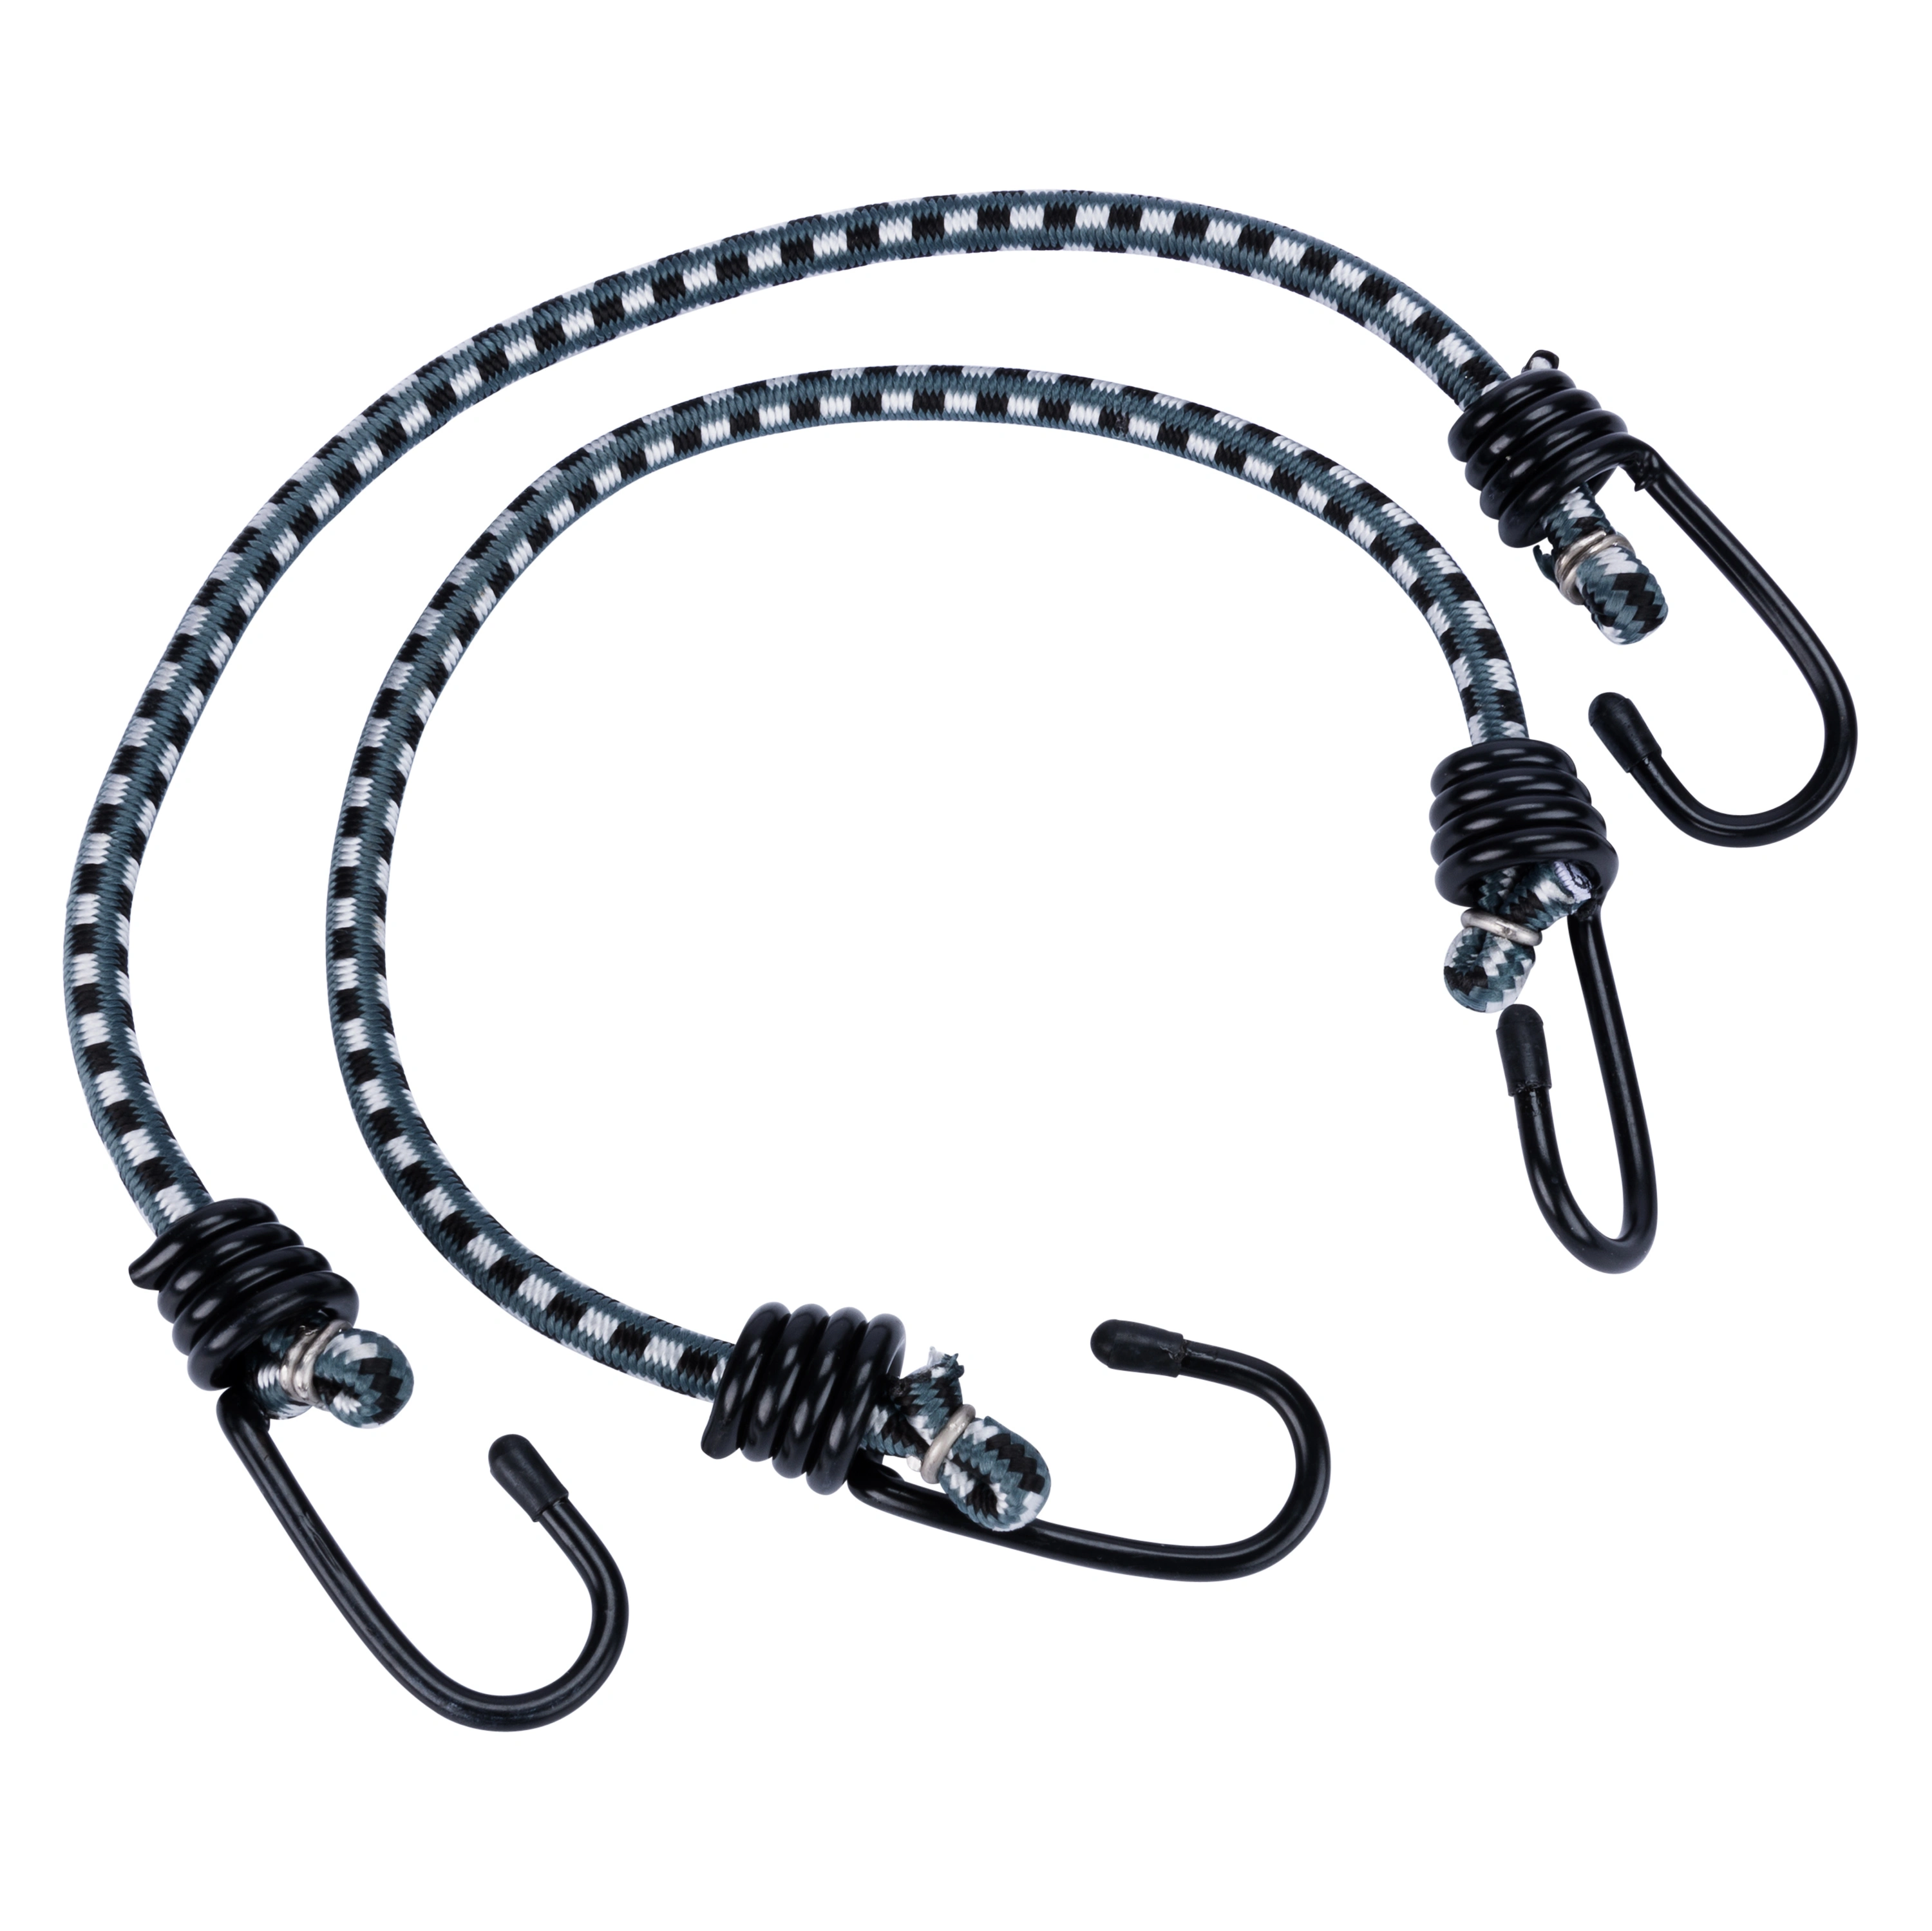 18" Vinyl Coated Bungee Cord variant image view